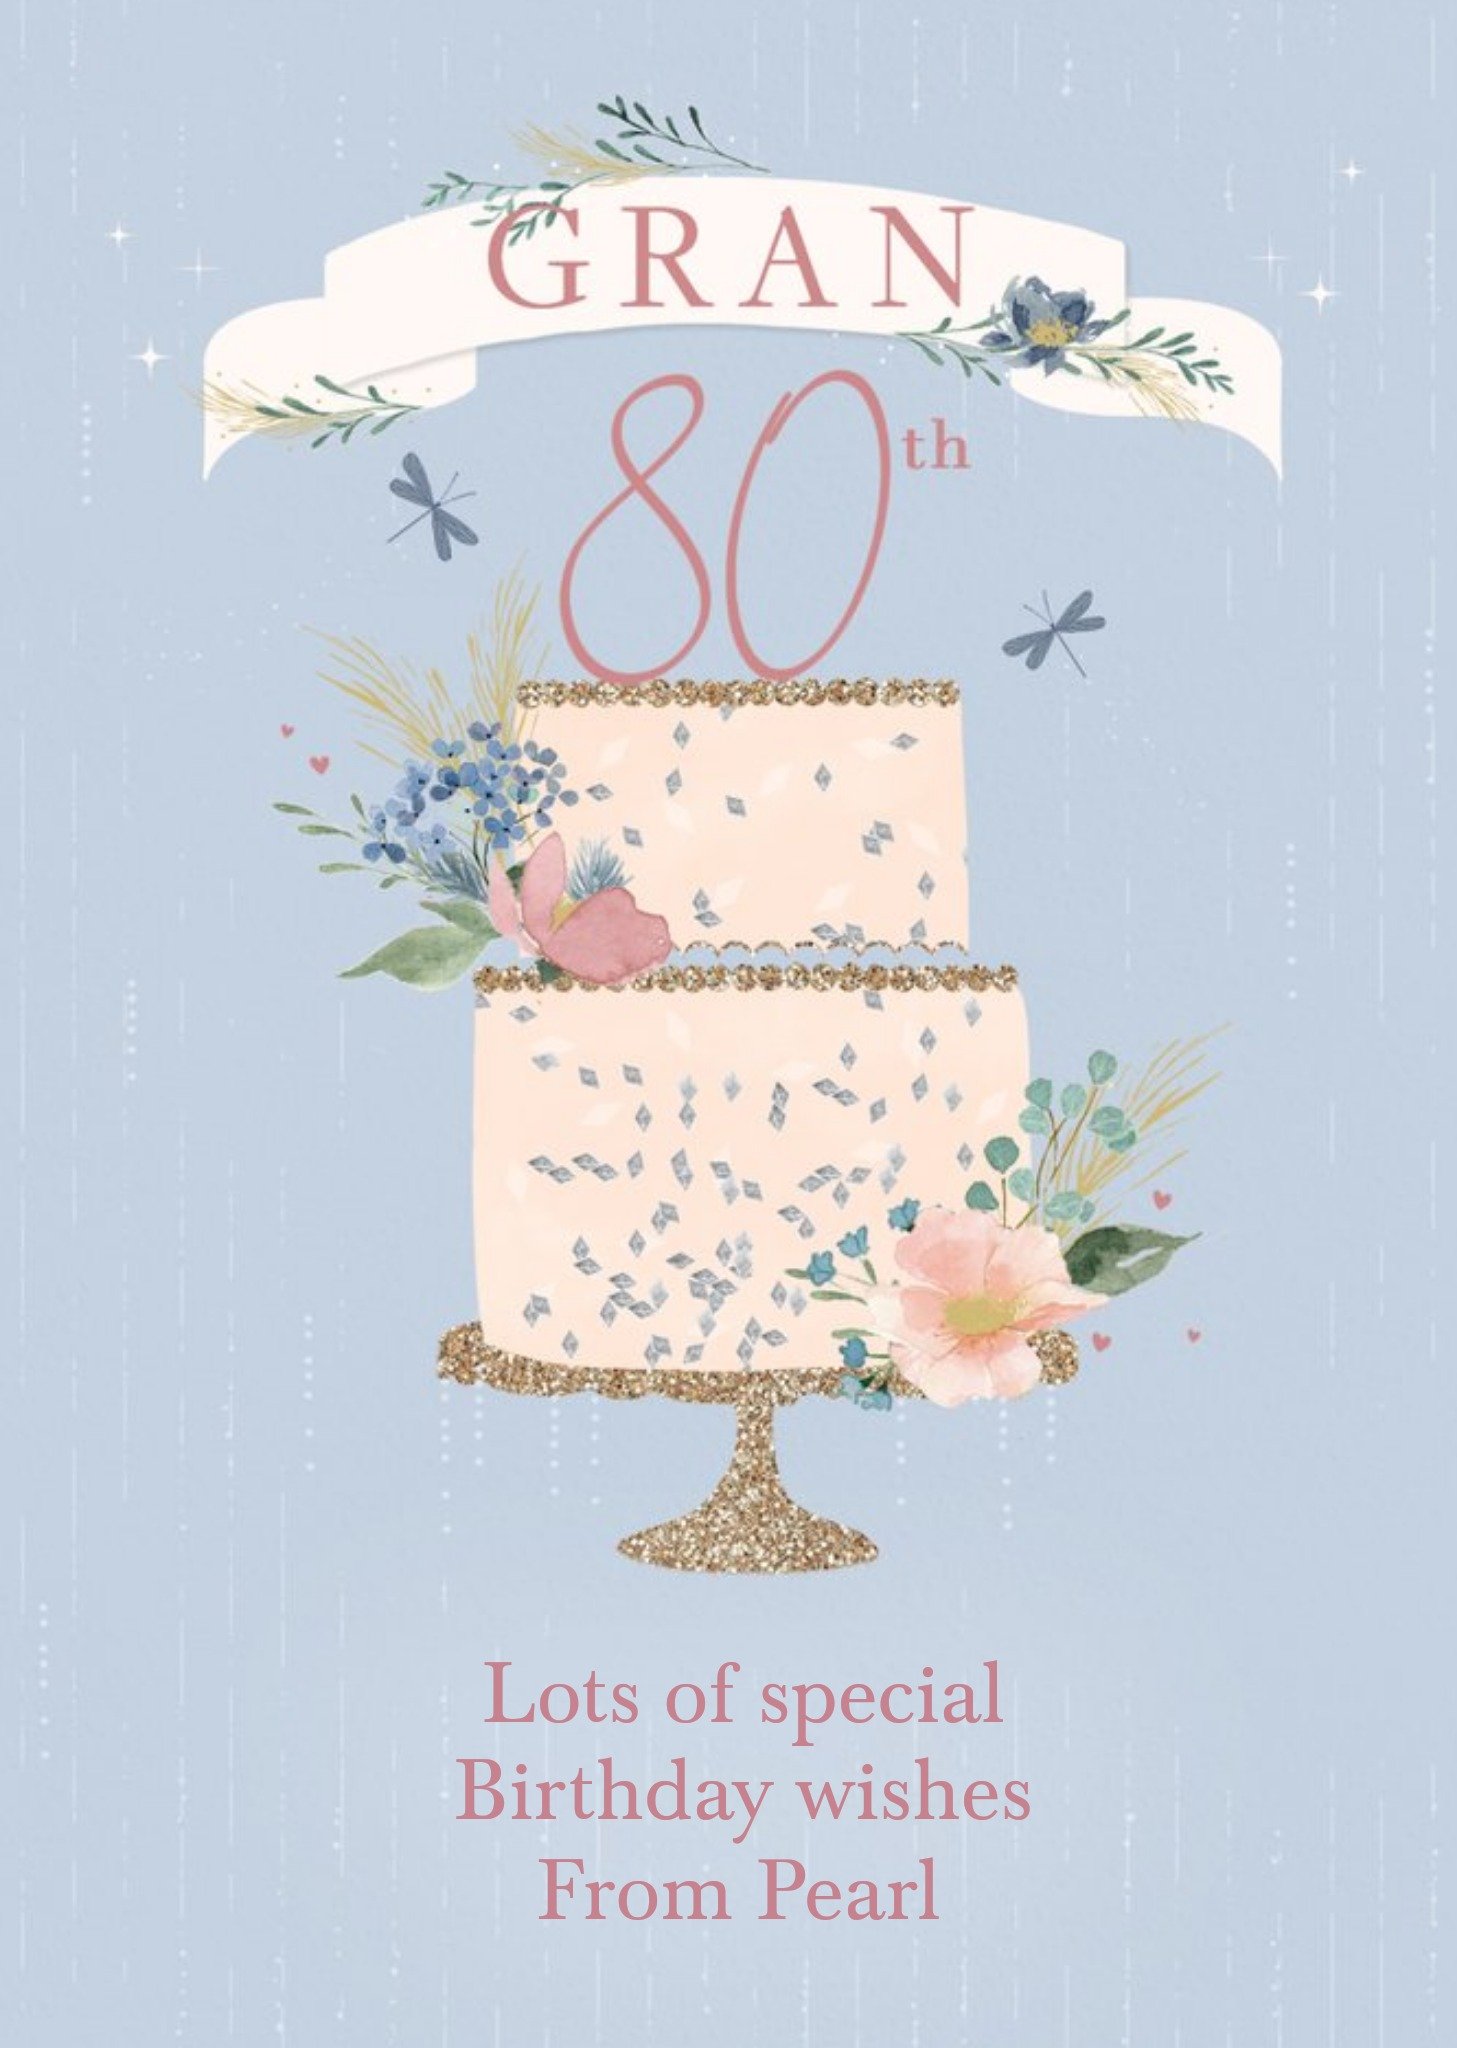 Moonpig Illustration Of A Two-Tier Cake Decorated With Flowers Gran's Eightieth Birthday Card, Large